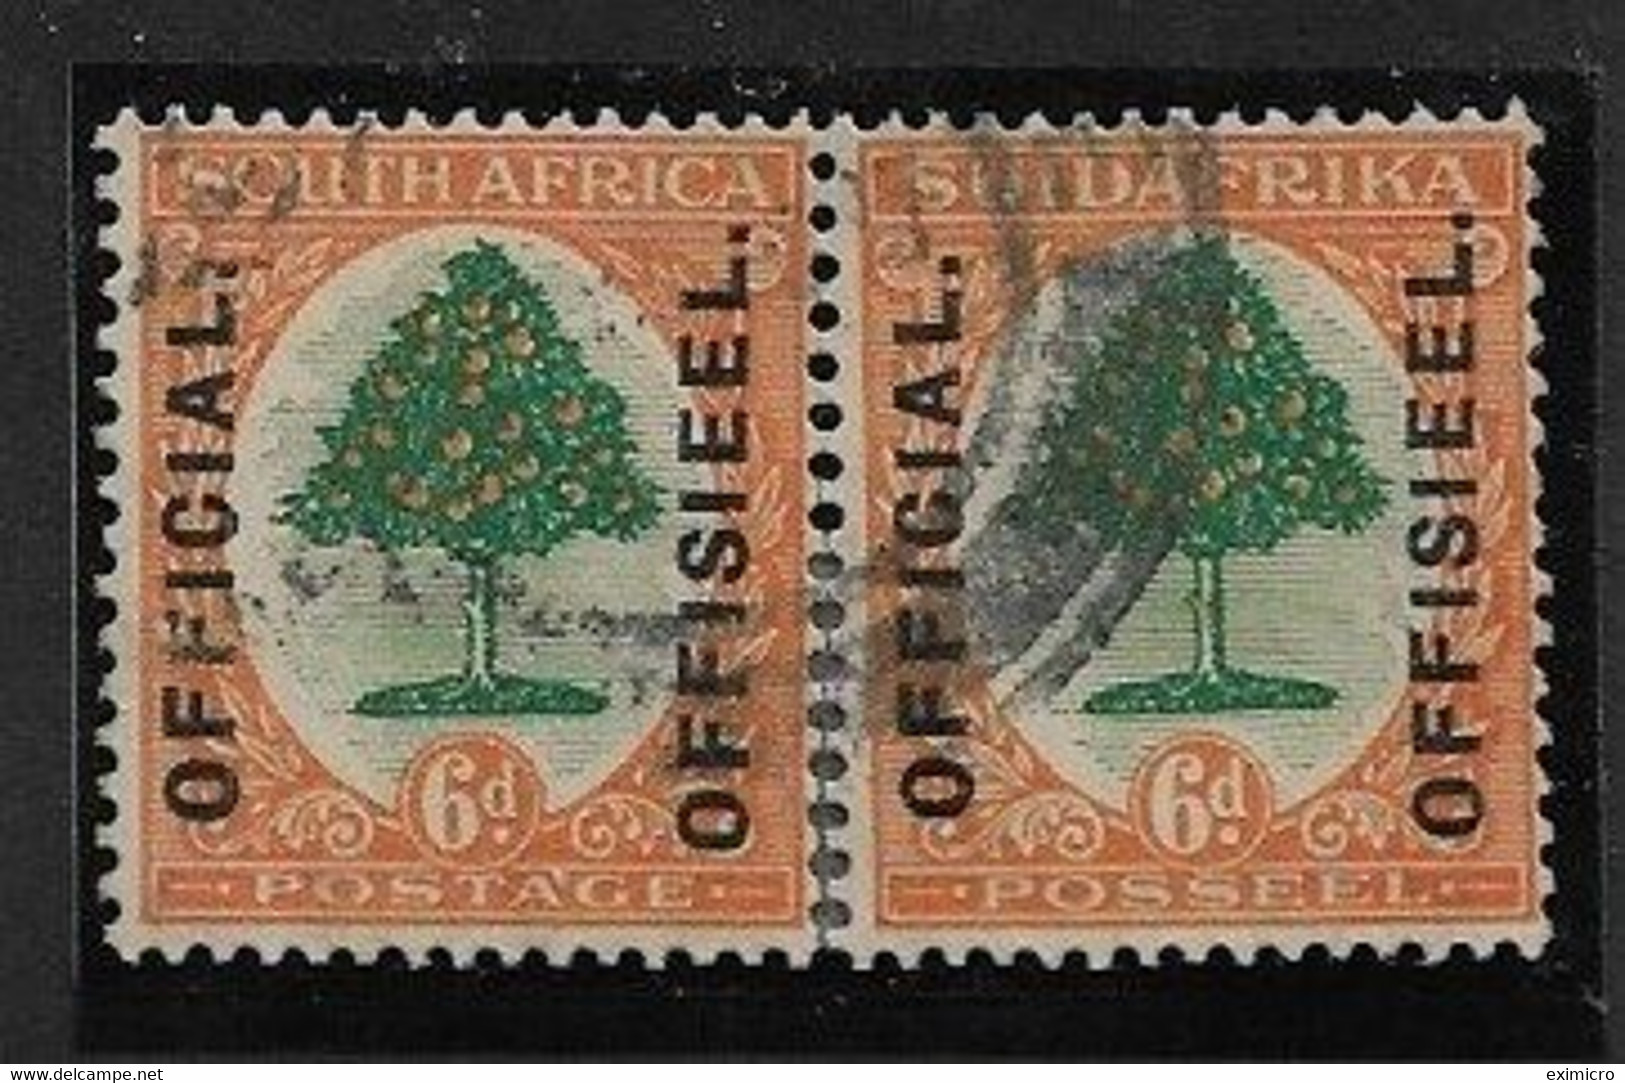 SOUTH AFRICA 1926 6d OFFICIAL BILINGUAL PAIR SG O4 FINE USED Cat £75 - Service